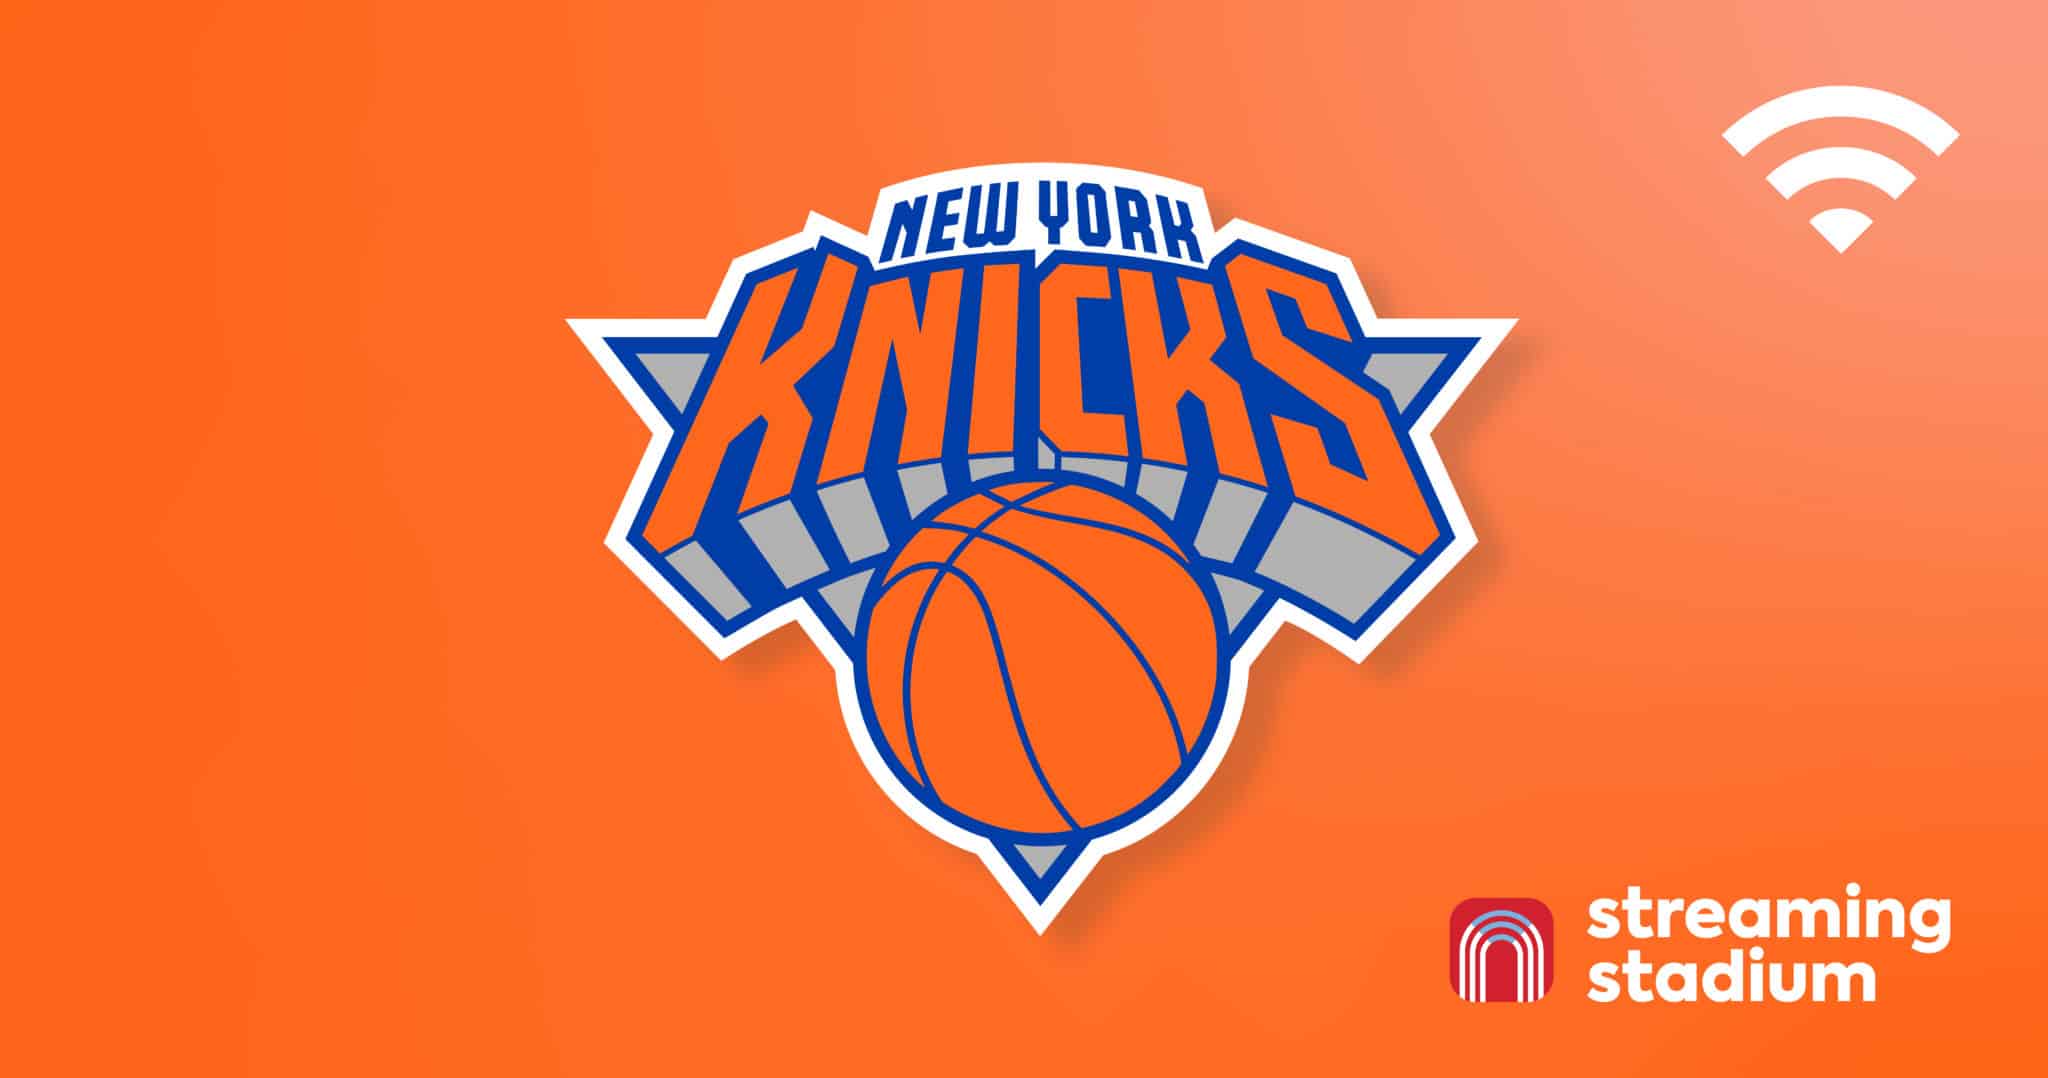 How to Watch Every NY Knicks Game Live Online Streaming Stadium